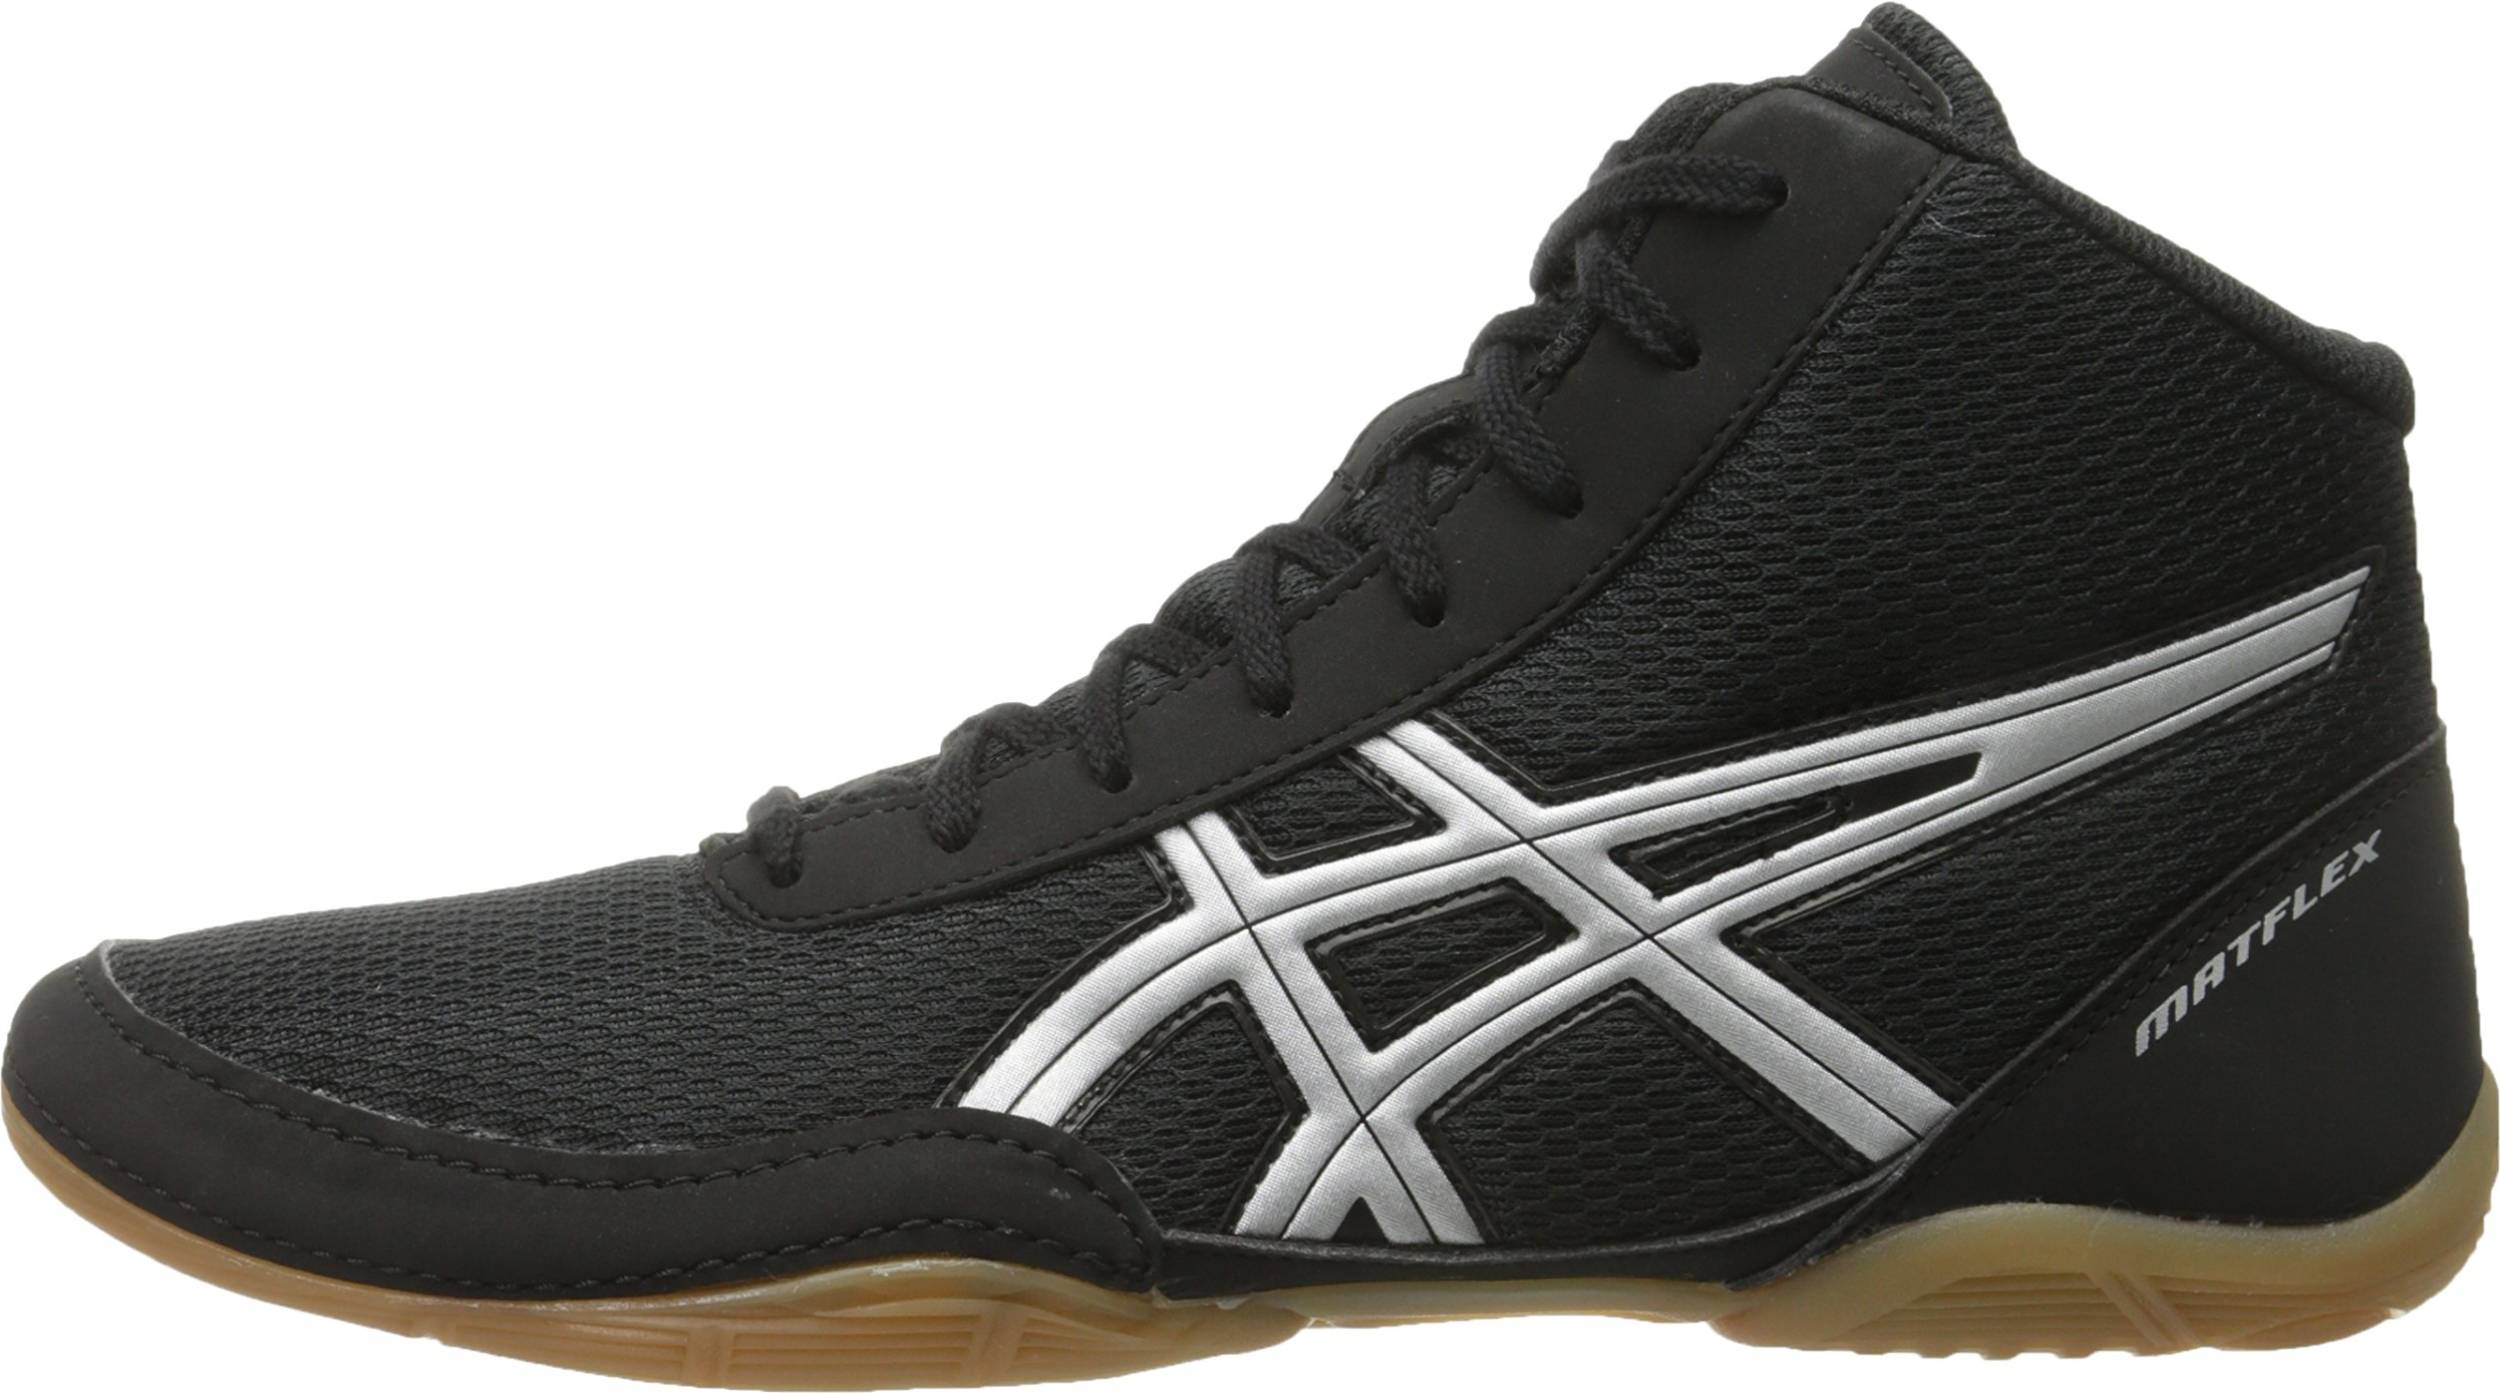 Only $52 + Review of Asics Matflex 5 